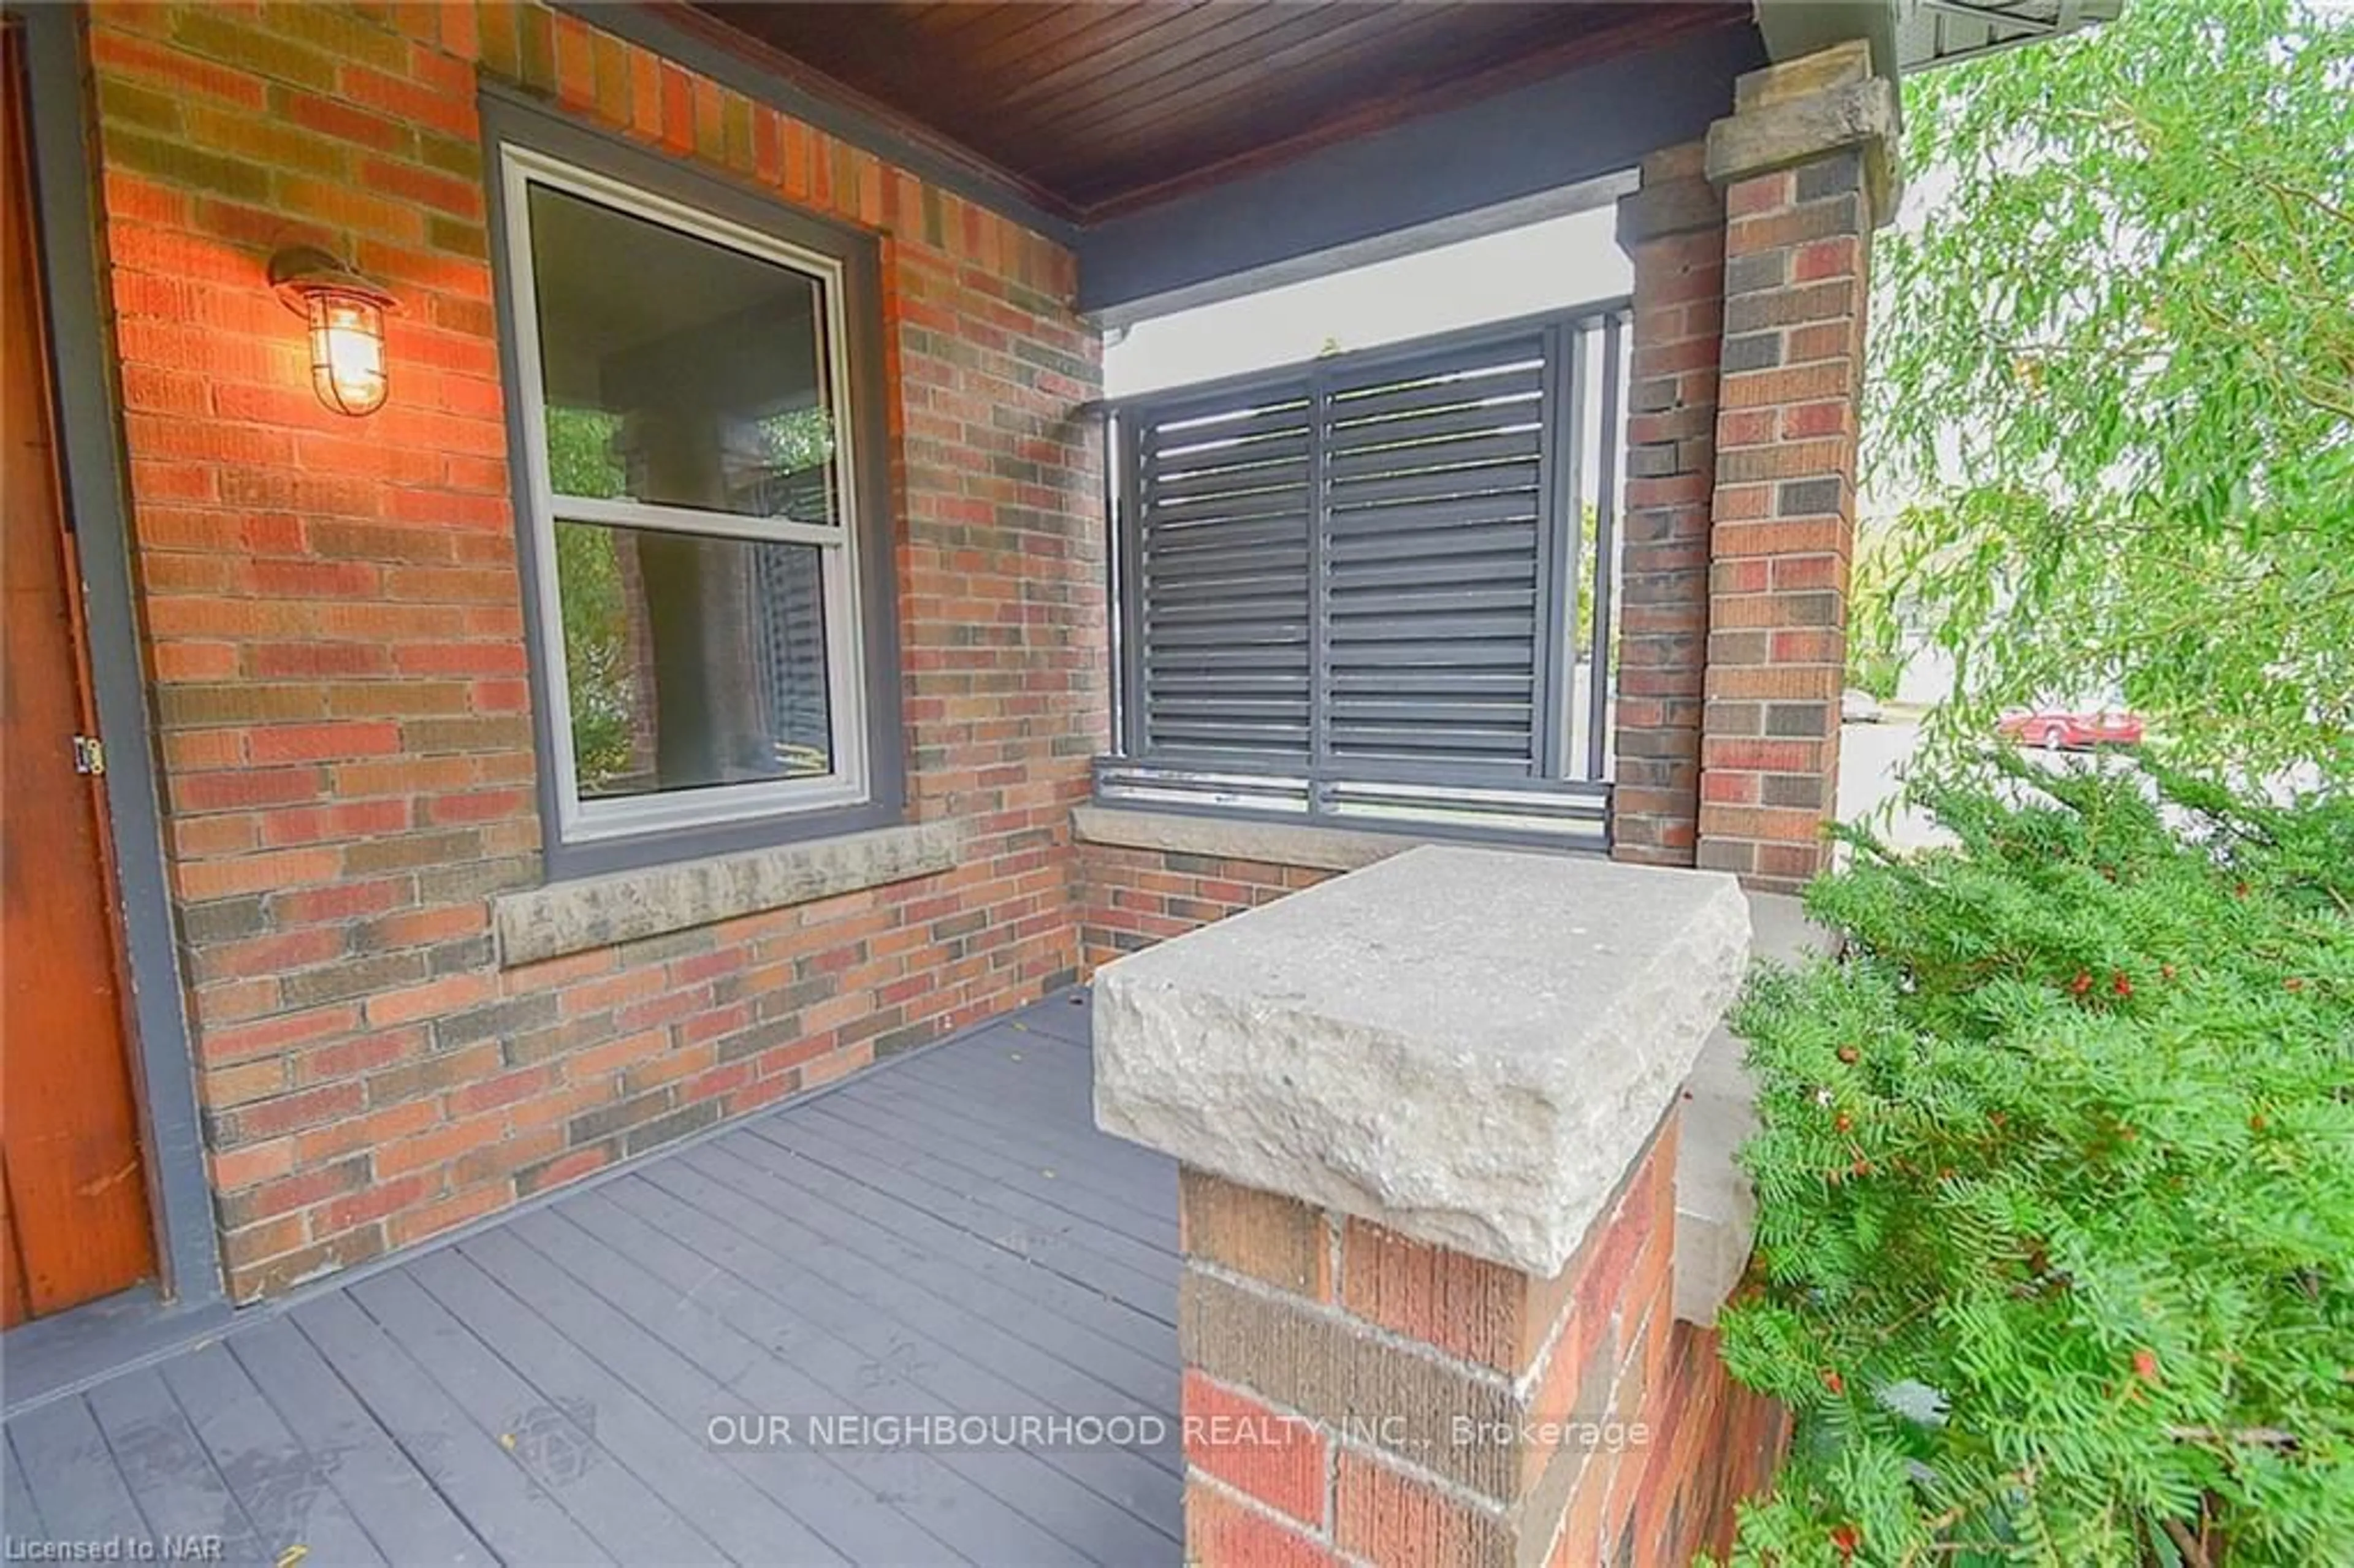 Home with brick exterior material for 103 Carlton St, St. Catharines Ontario L2R 1R2